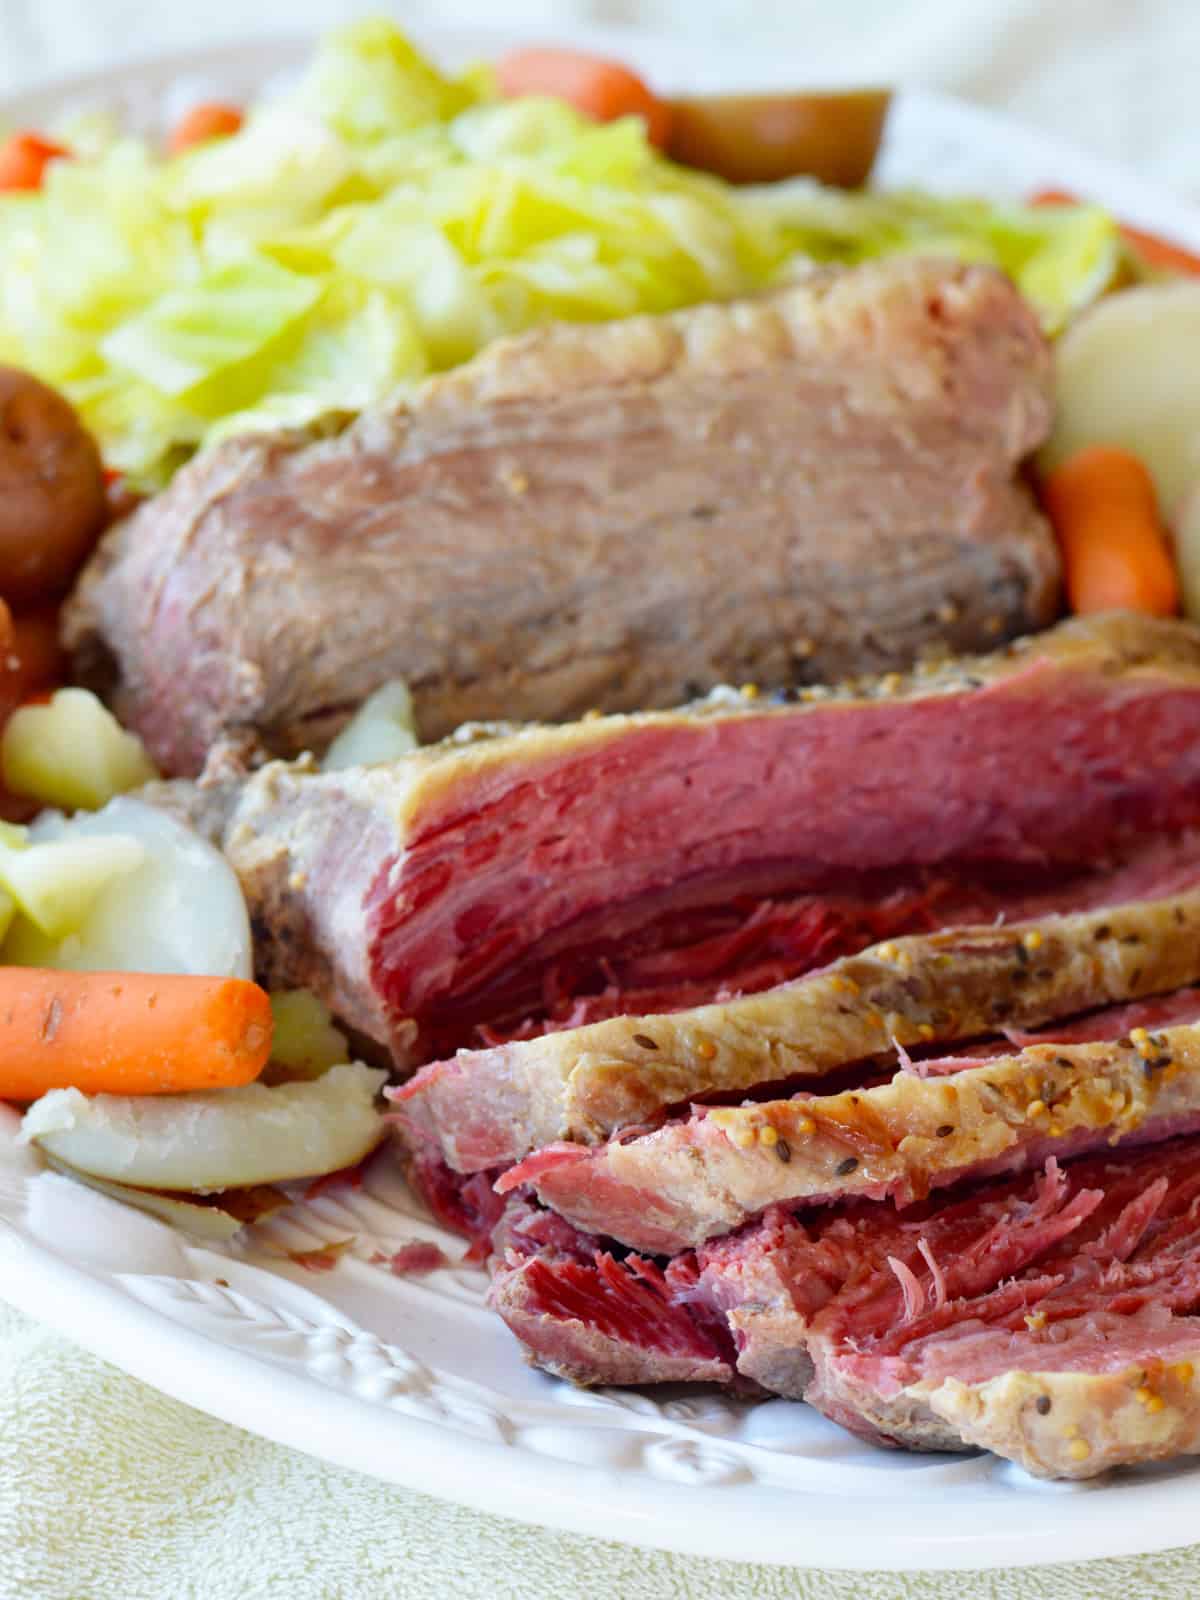 sous vide corned beef brisket on a plate with potatoes, cabbage and carrots